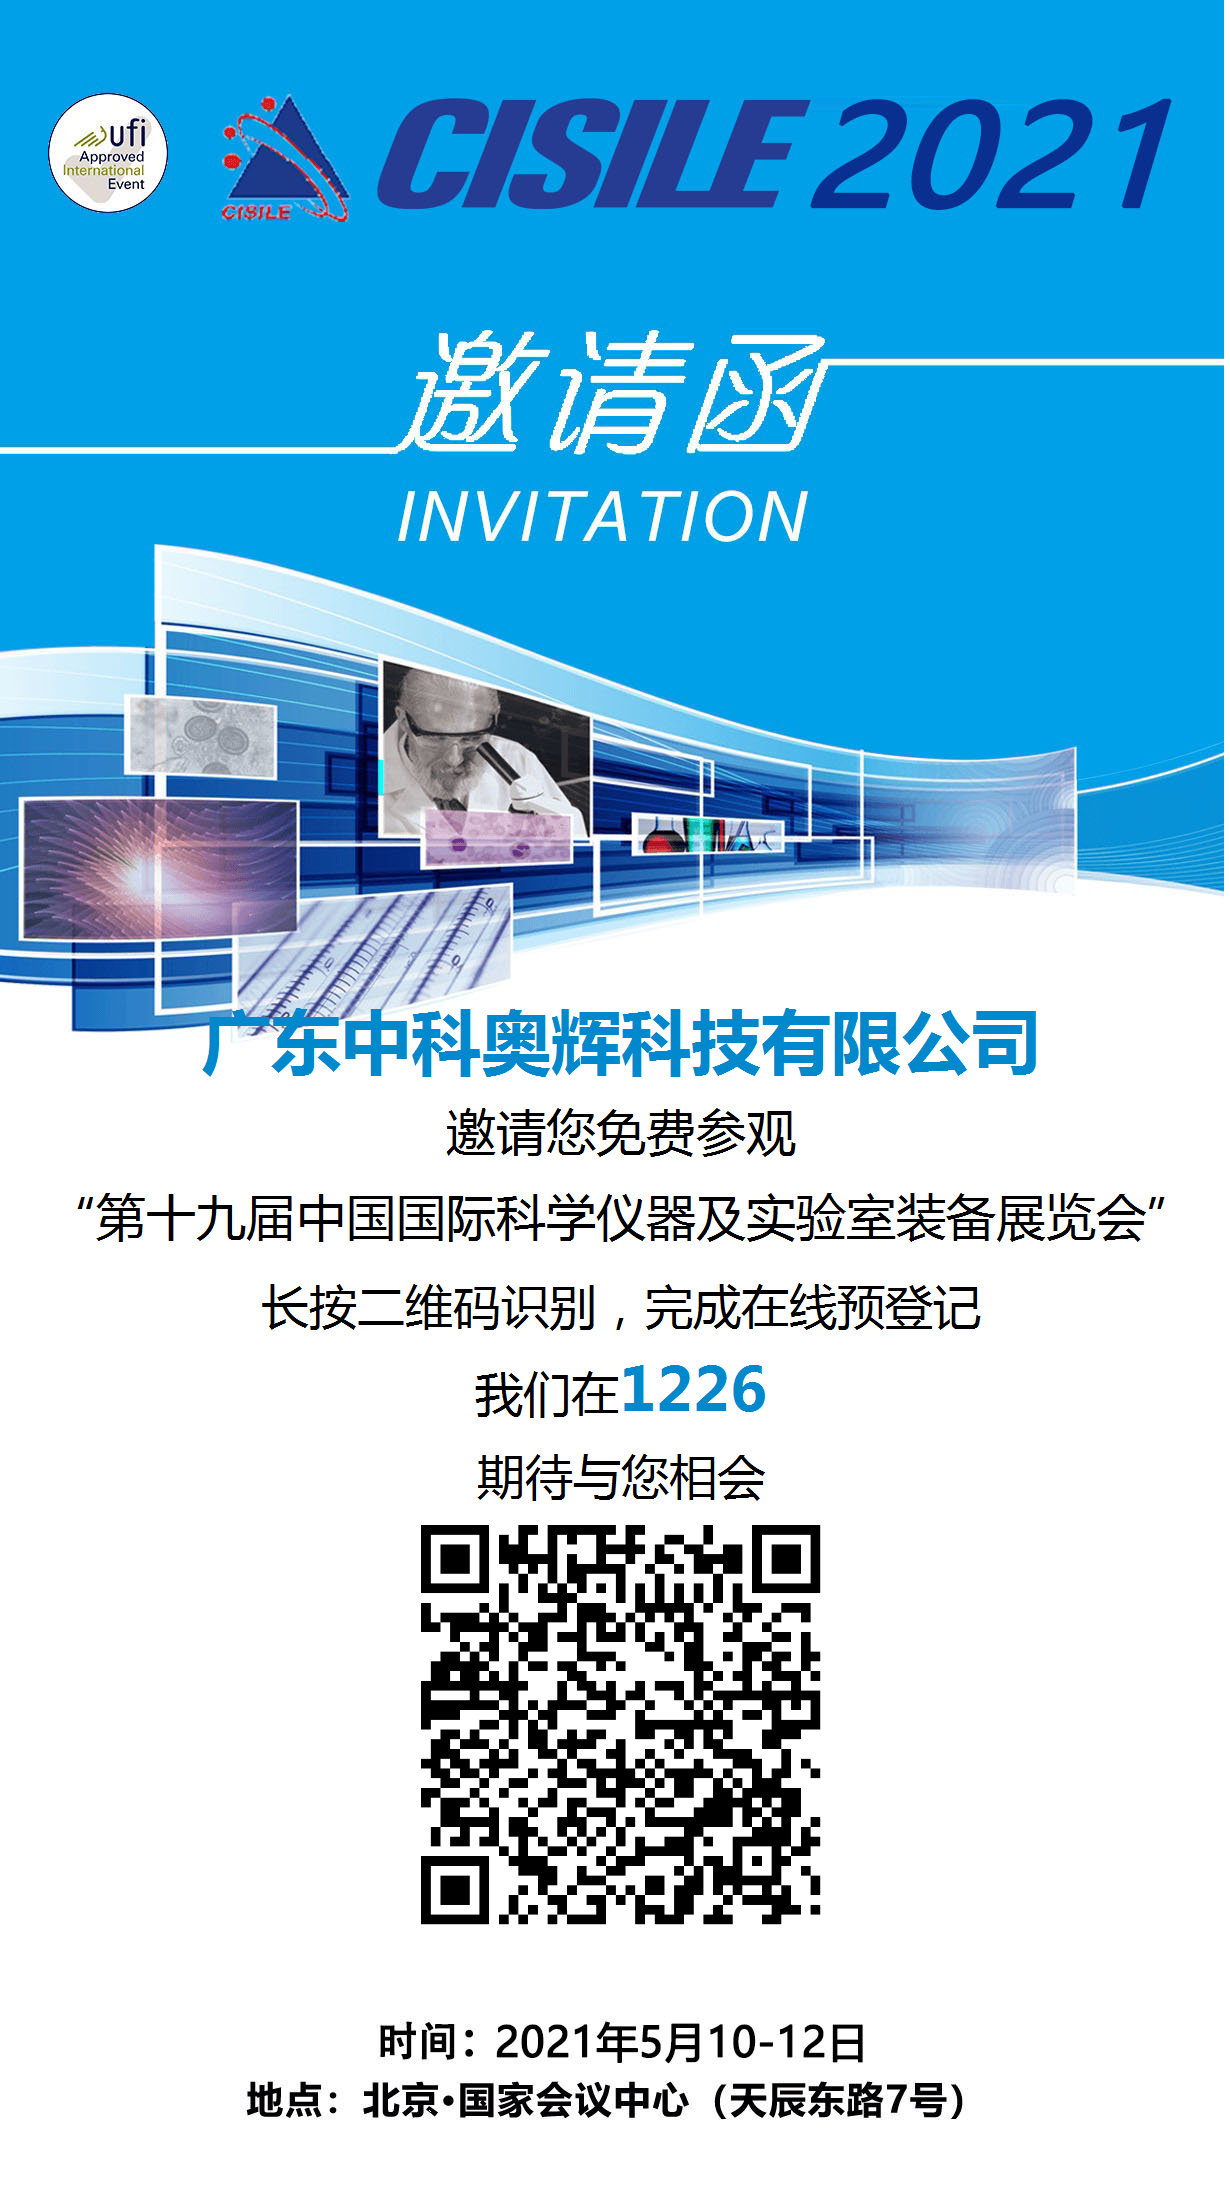 Zhongke Aohui will meet you at the 19th China International Scientific Instrument and Laboratory Equipment Exhibition